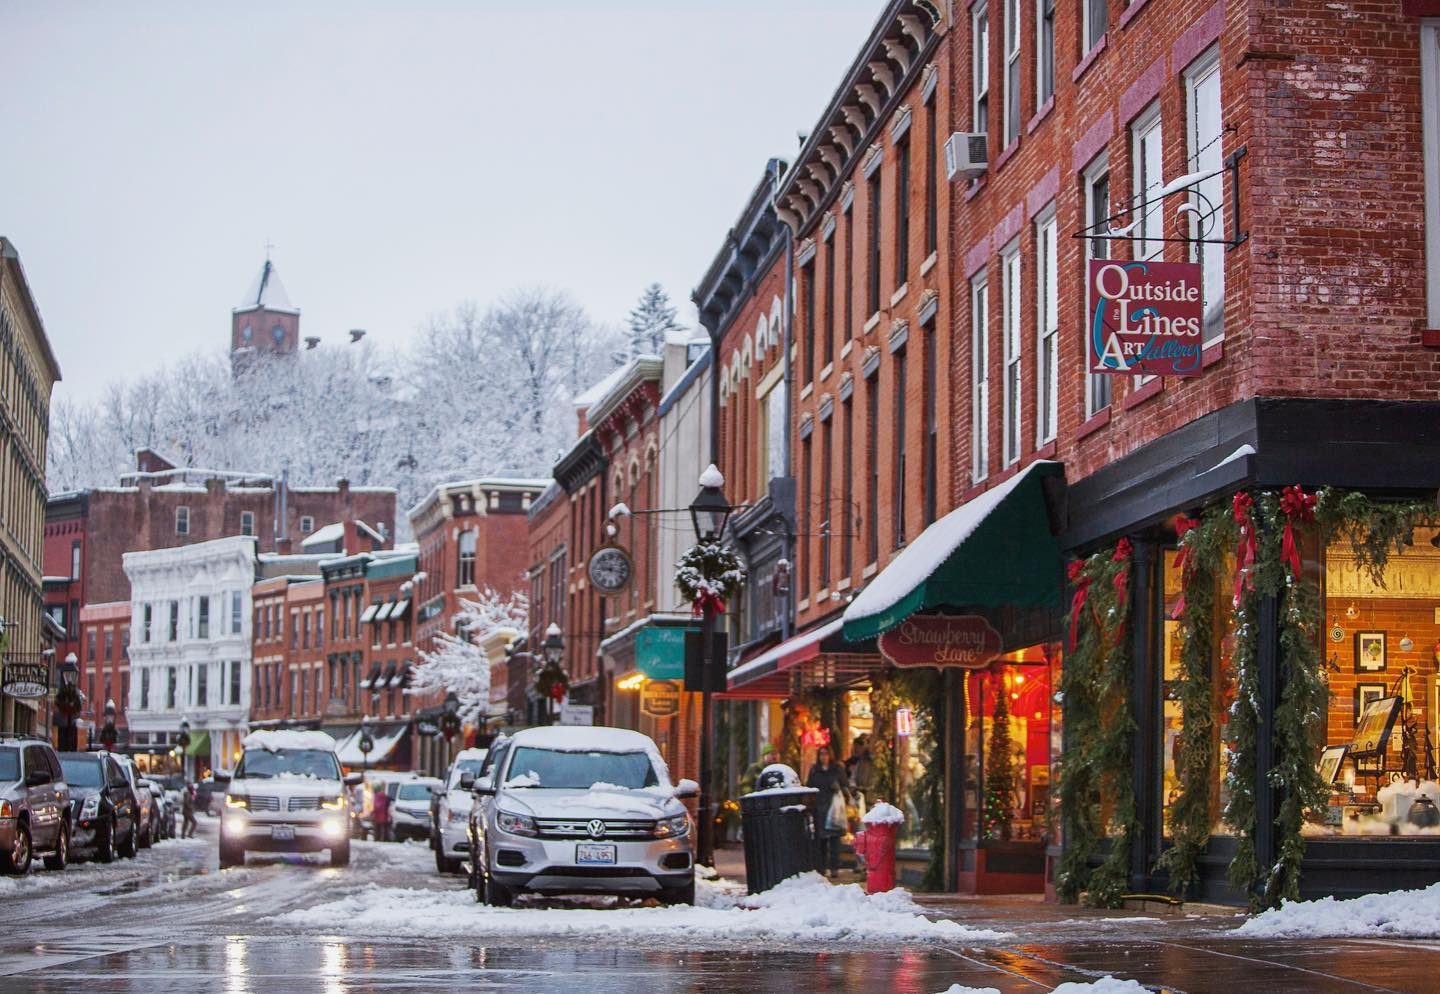 <p><strong>Best for:</strong> Holiday fireworks</p> <p>With its many 19th-century buildings, bed and breakfasts, and antique shops, Galena is a cozy spot for an old-fashioned, small-town Christmas. Set among the snow-covered farmland of northern Illinois, the town's charming Main Street gets all decked out for the season. The festivities begin with "Holiday Fire in the Sky," a fireworks display over the Galena River. See 5,000 candles along streets, stairs, and sidewalks during the "Night of the Luminarios and Living Windows," in which storefronts show off amazing window displays and offer extended hours. Revelers can also enjoy carolers singing the <a href="https://www.rd.com/list/best-christmas-songs/">best Christmas songs</a> from the Grant Park gazebo.</p> <p>Galena boasts many well-appointed B&Bs, but the Aldrich Guest House one stands out for its amazing location just a few blocks from Grant Park, as well as scrumptious breakfasts and comfortable rooms. Elegant yet simply decorated, it's the perfect spot for a cozy holiday away from the crowds.</p> <p class="listicle-page__cta-button-shop"><a class="shop-btn" href="https://www.tripadvisor.com/Hotel_Review-g36022-d560928-Reviews-Aldrich_Guest_House-Galena_Illinois.html">Book Now</a></p>